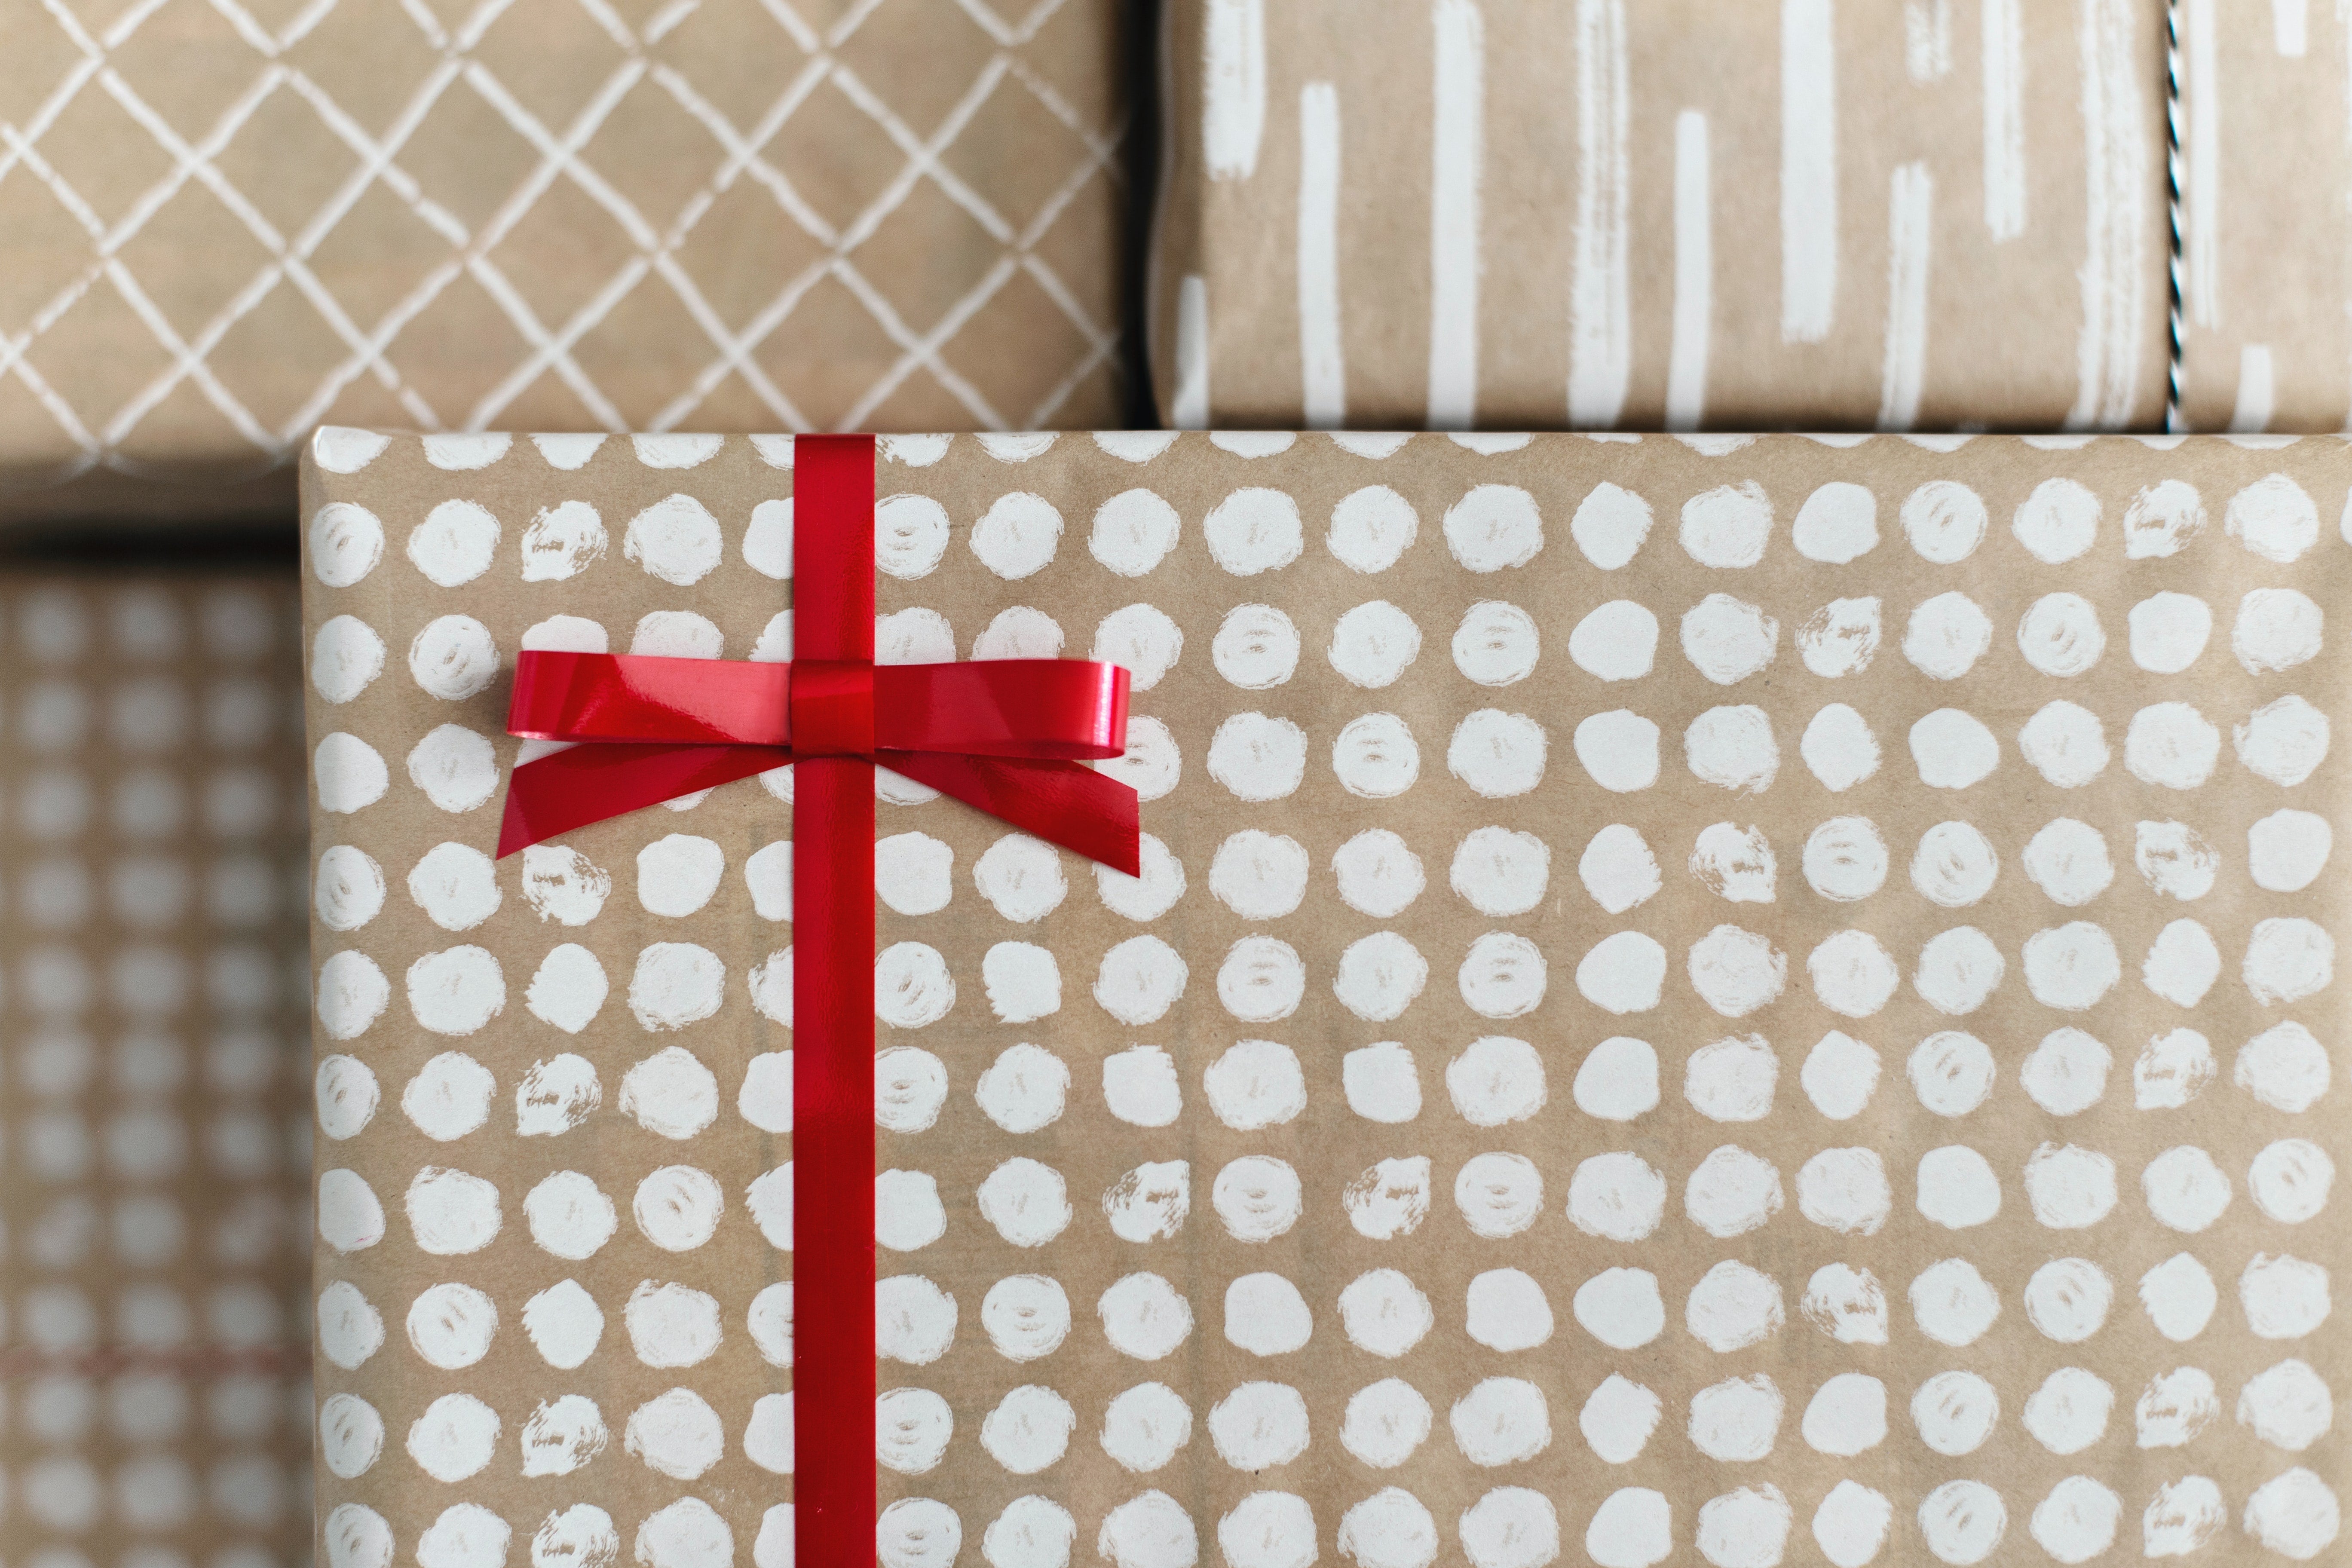 Gift Wrap, , Pacific Rayne, Defiance Outdoor Gear Co.